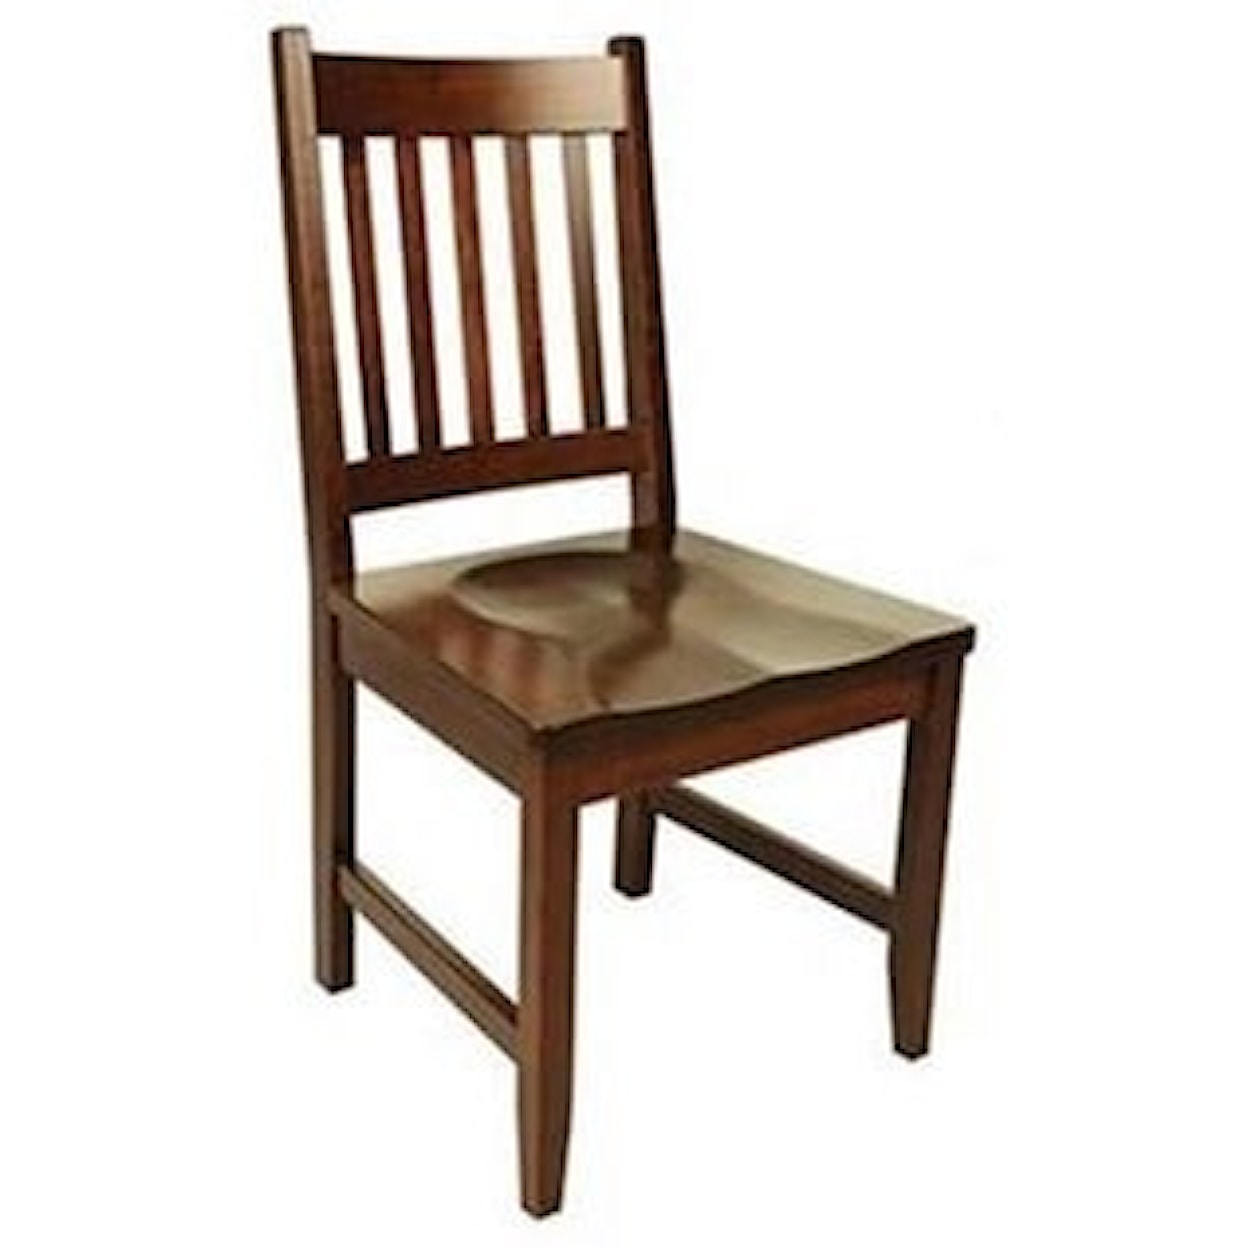 Horseshoe Bend 94A Solid Wood Customizable Side Chair